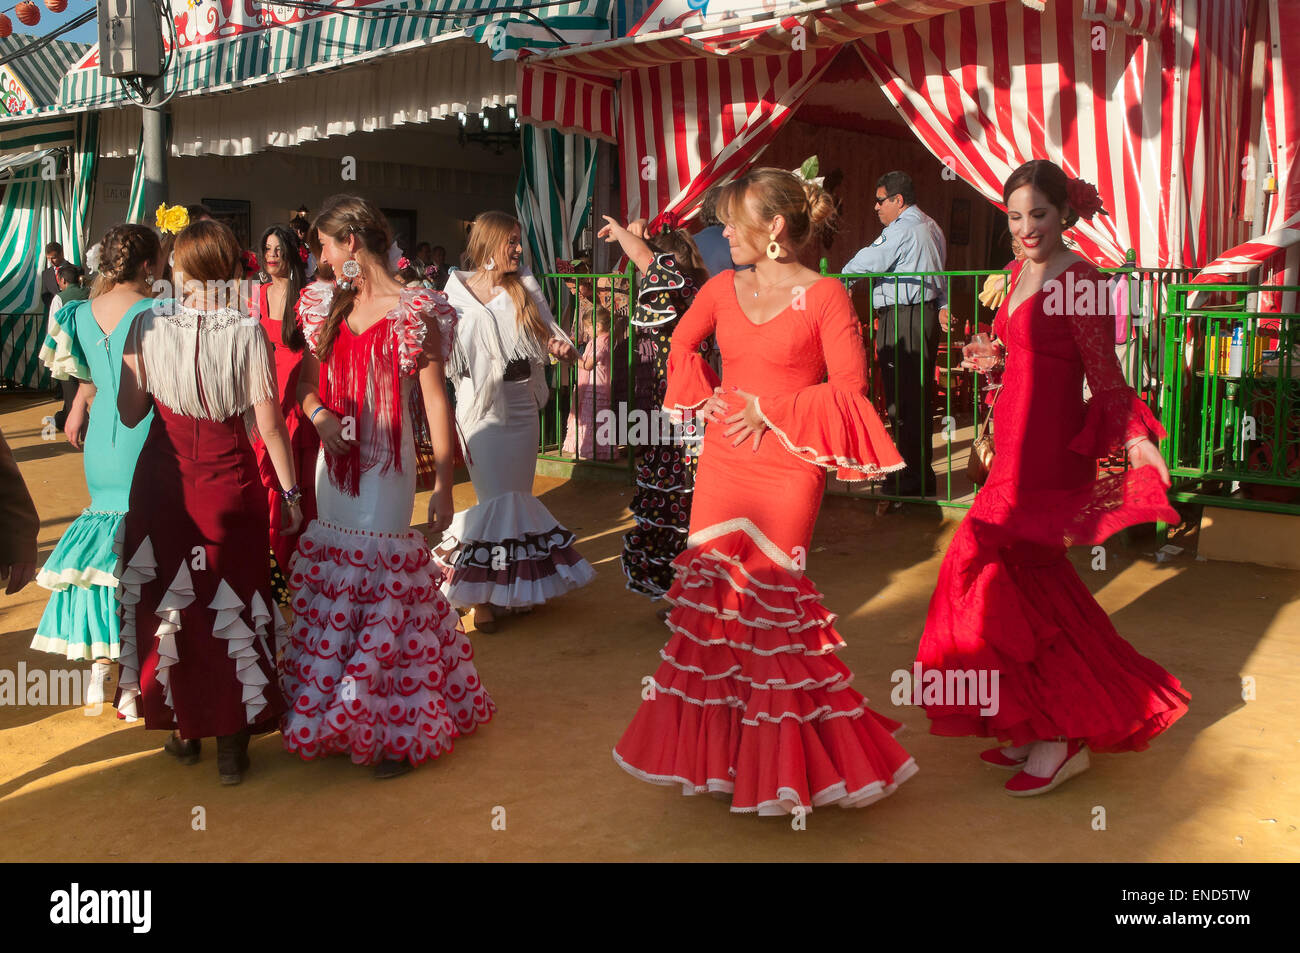 April Fair, Young women dancing with the traditional flamenco dress, Seville, Region of Andalusia, Spain, Europe Stock Photo